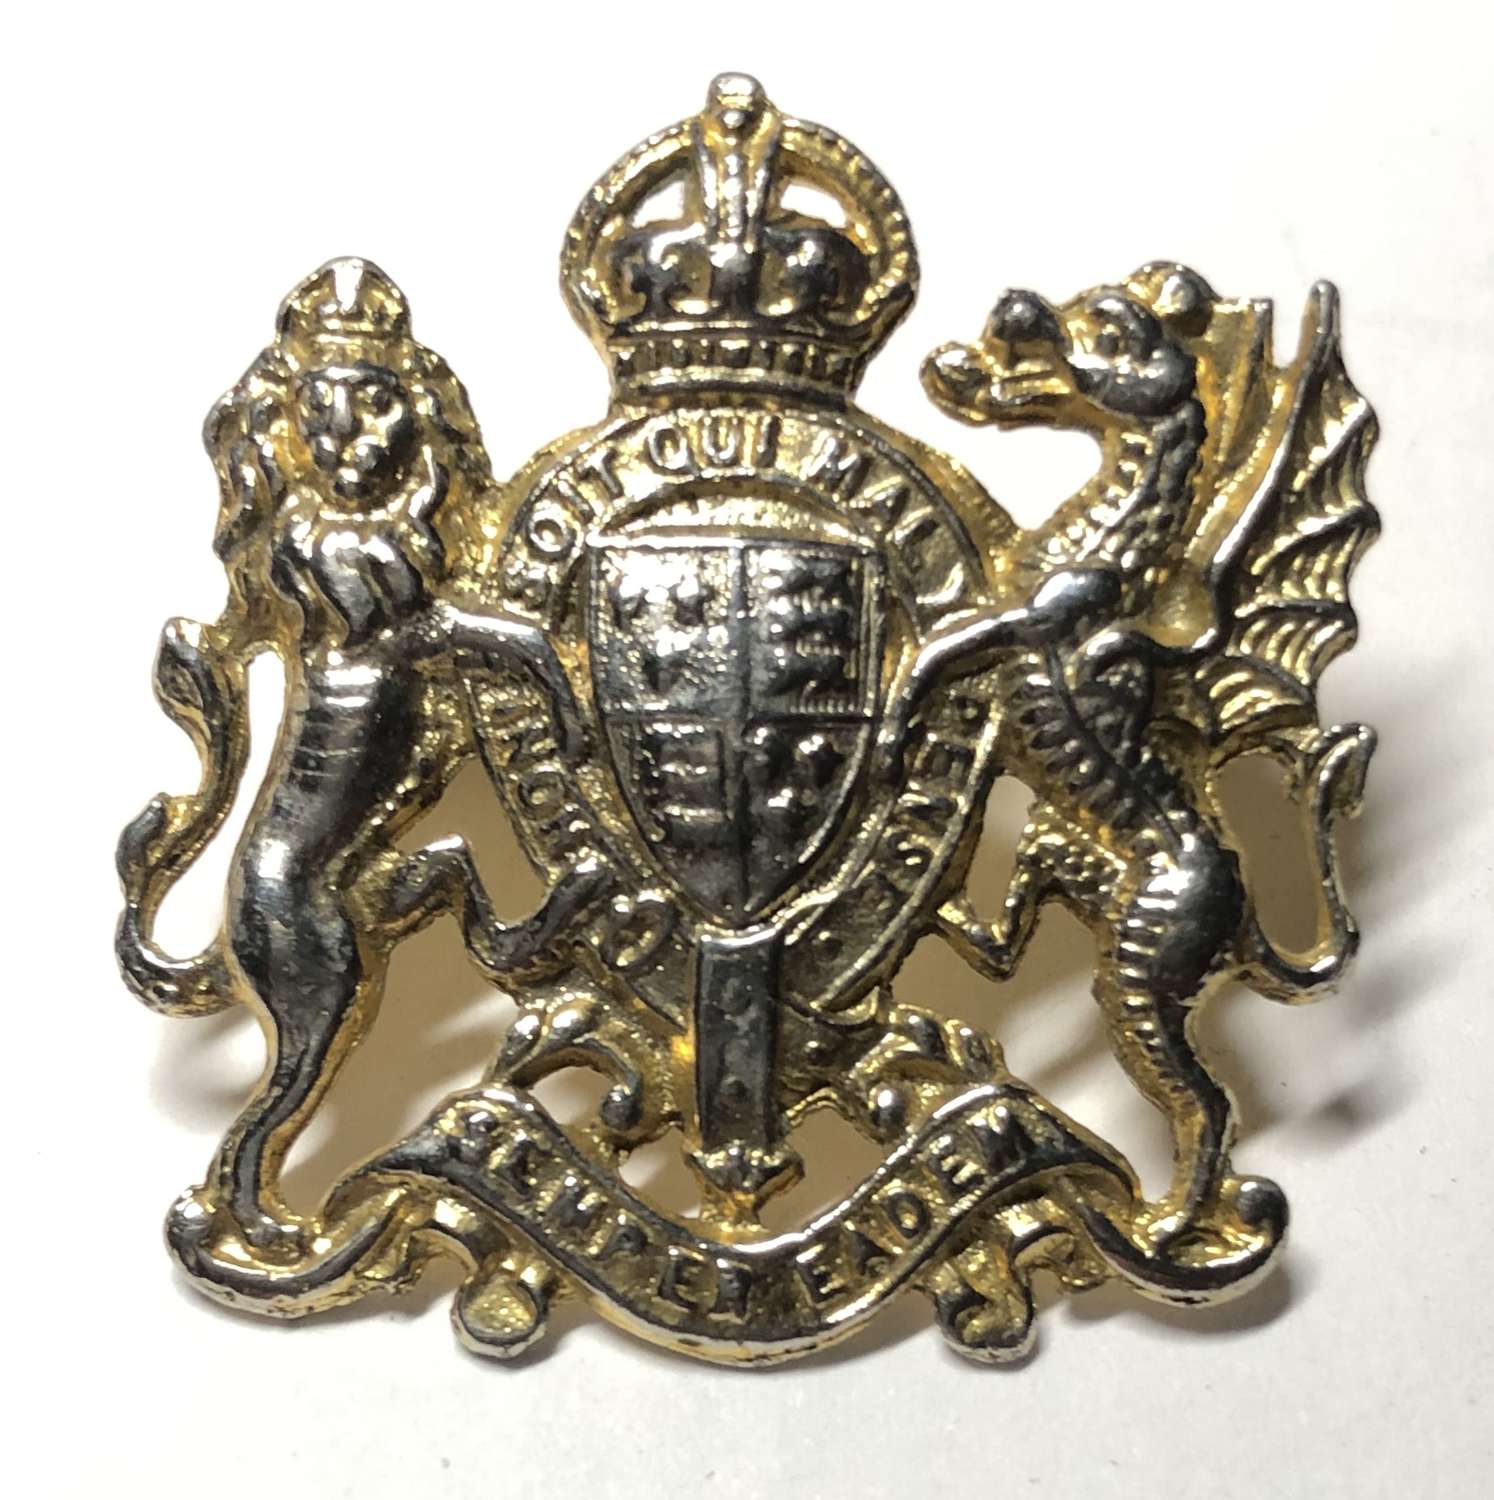 Elizabeth College, Guernsey early anodised style cap badge